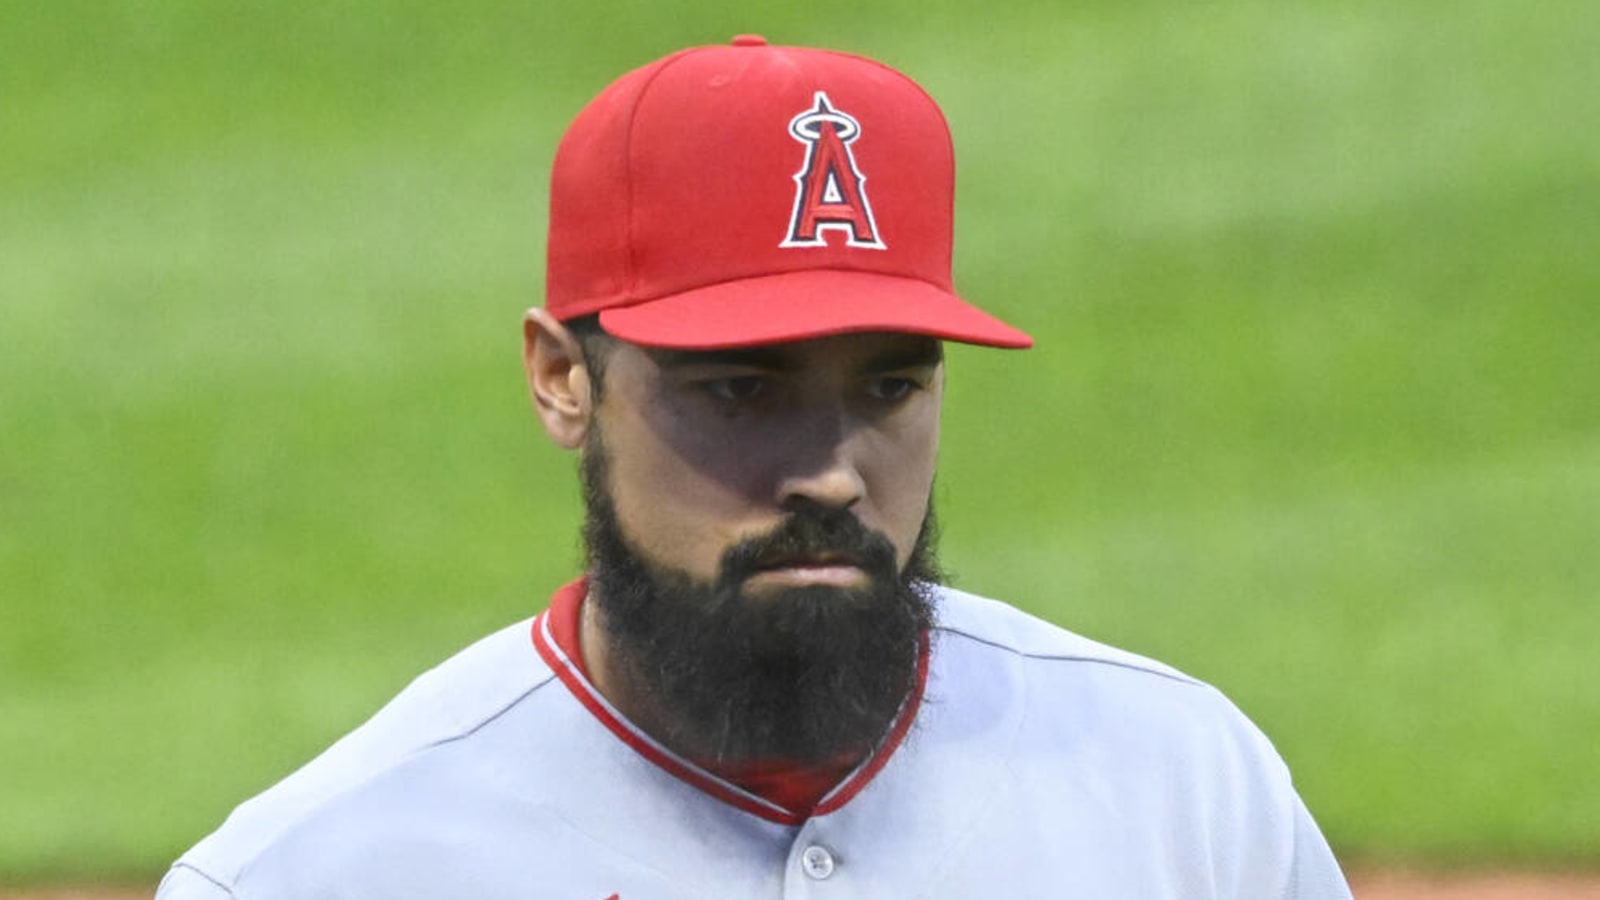 Angels third baseman's season likely done after just 43 games